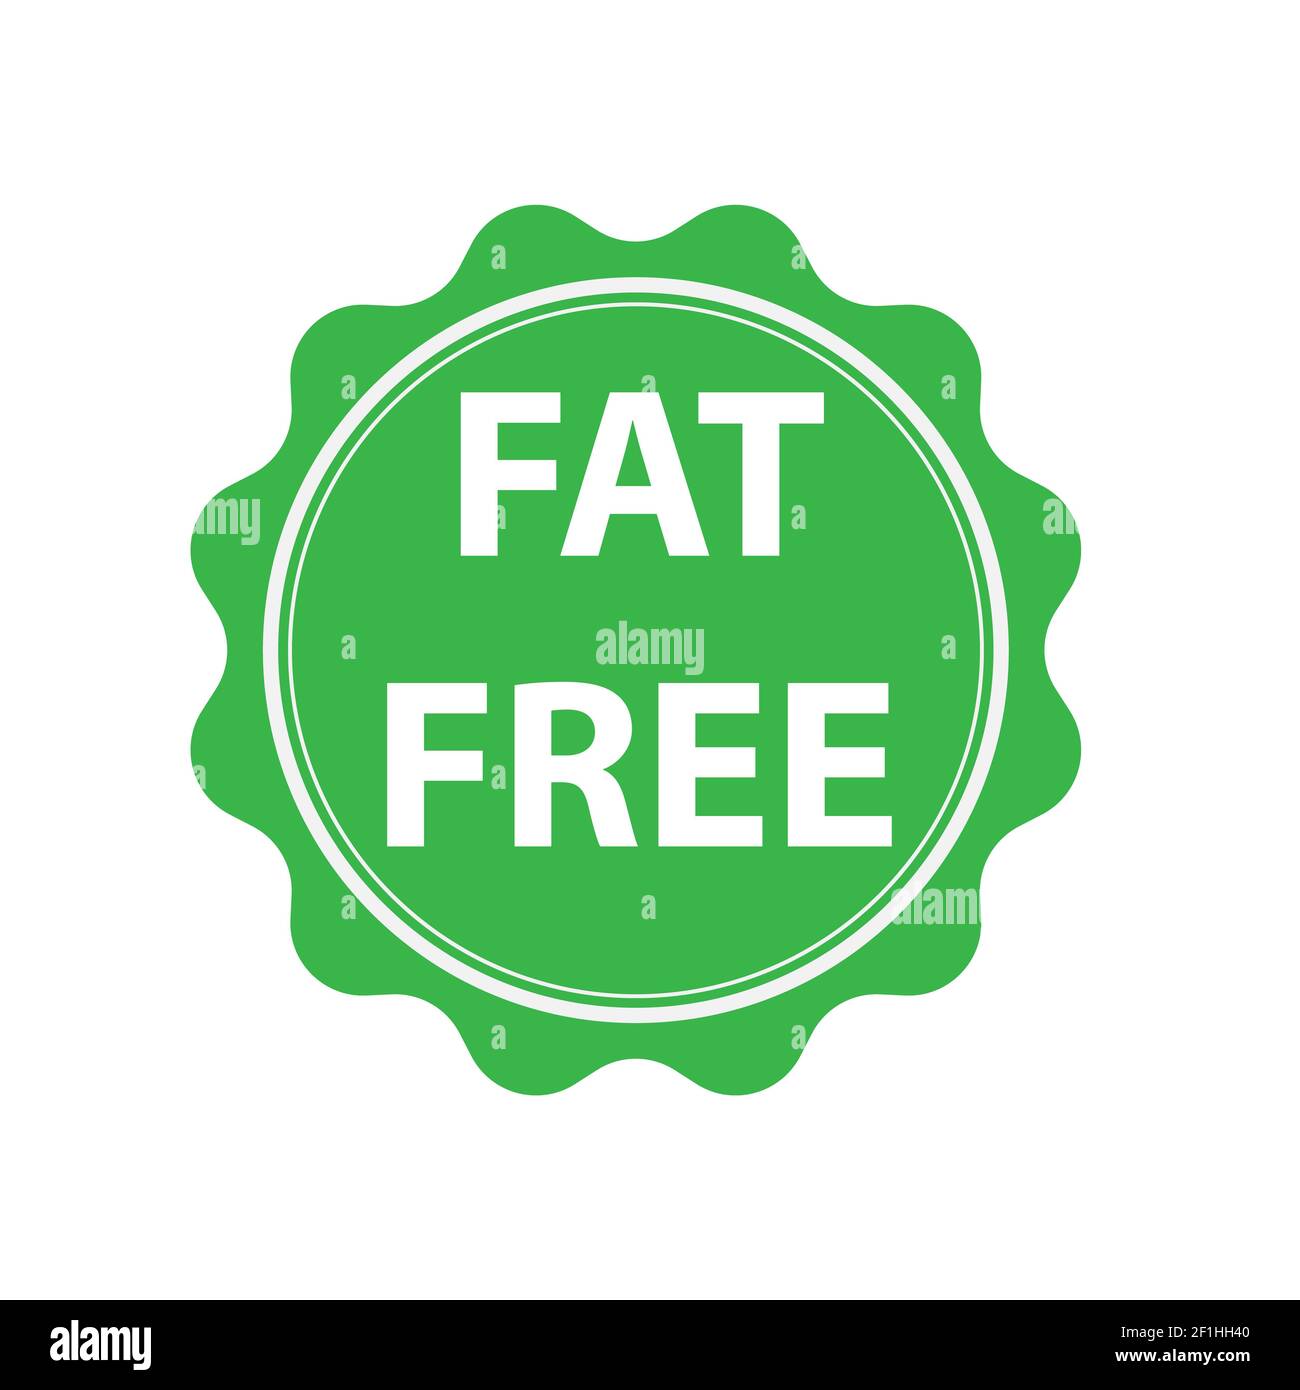 fat free icon on white background. fat free label sign. low fat free sticker. flat style. Stock Photo